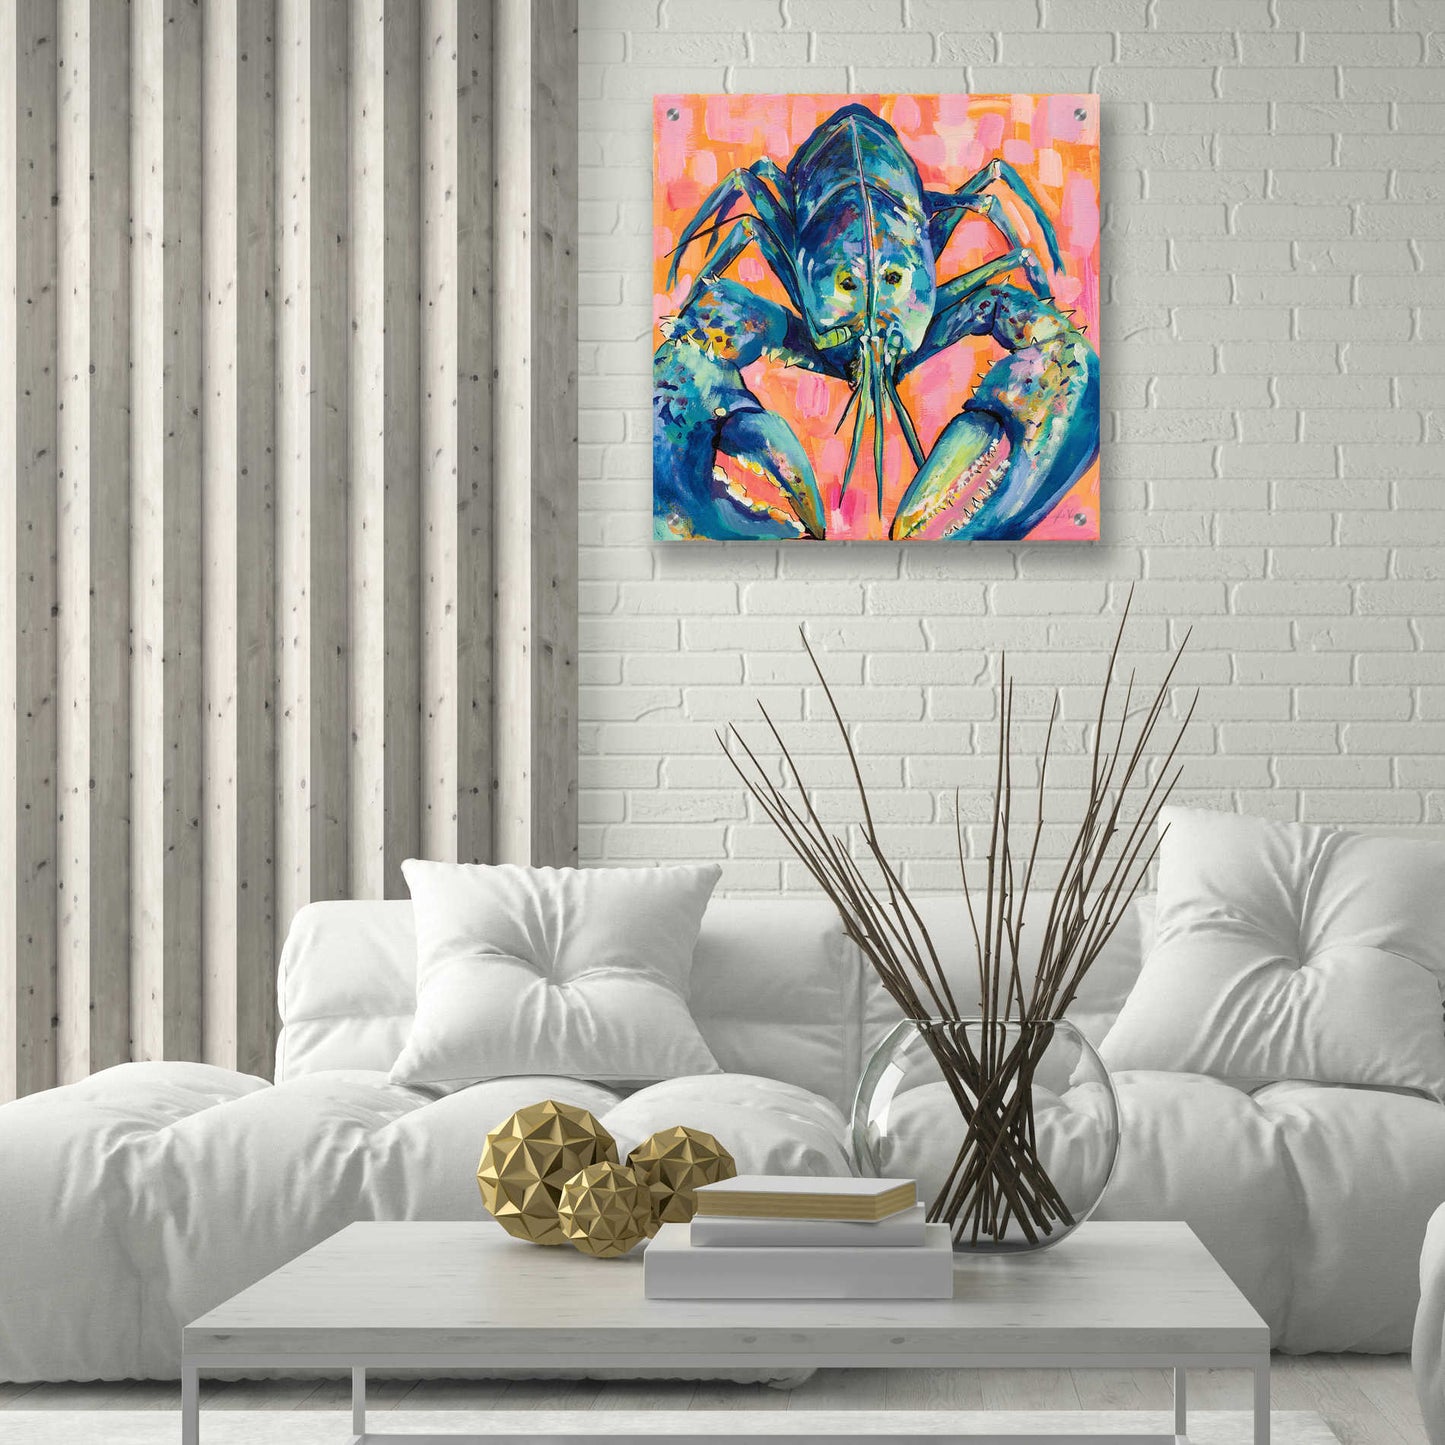 Epic Art 'Lilly Lobster I' by Jeanette Vertentes, Acrylic Glass Wall Art,24x24